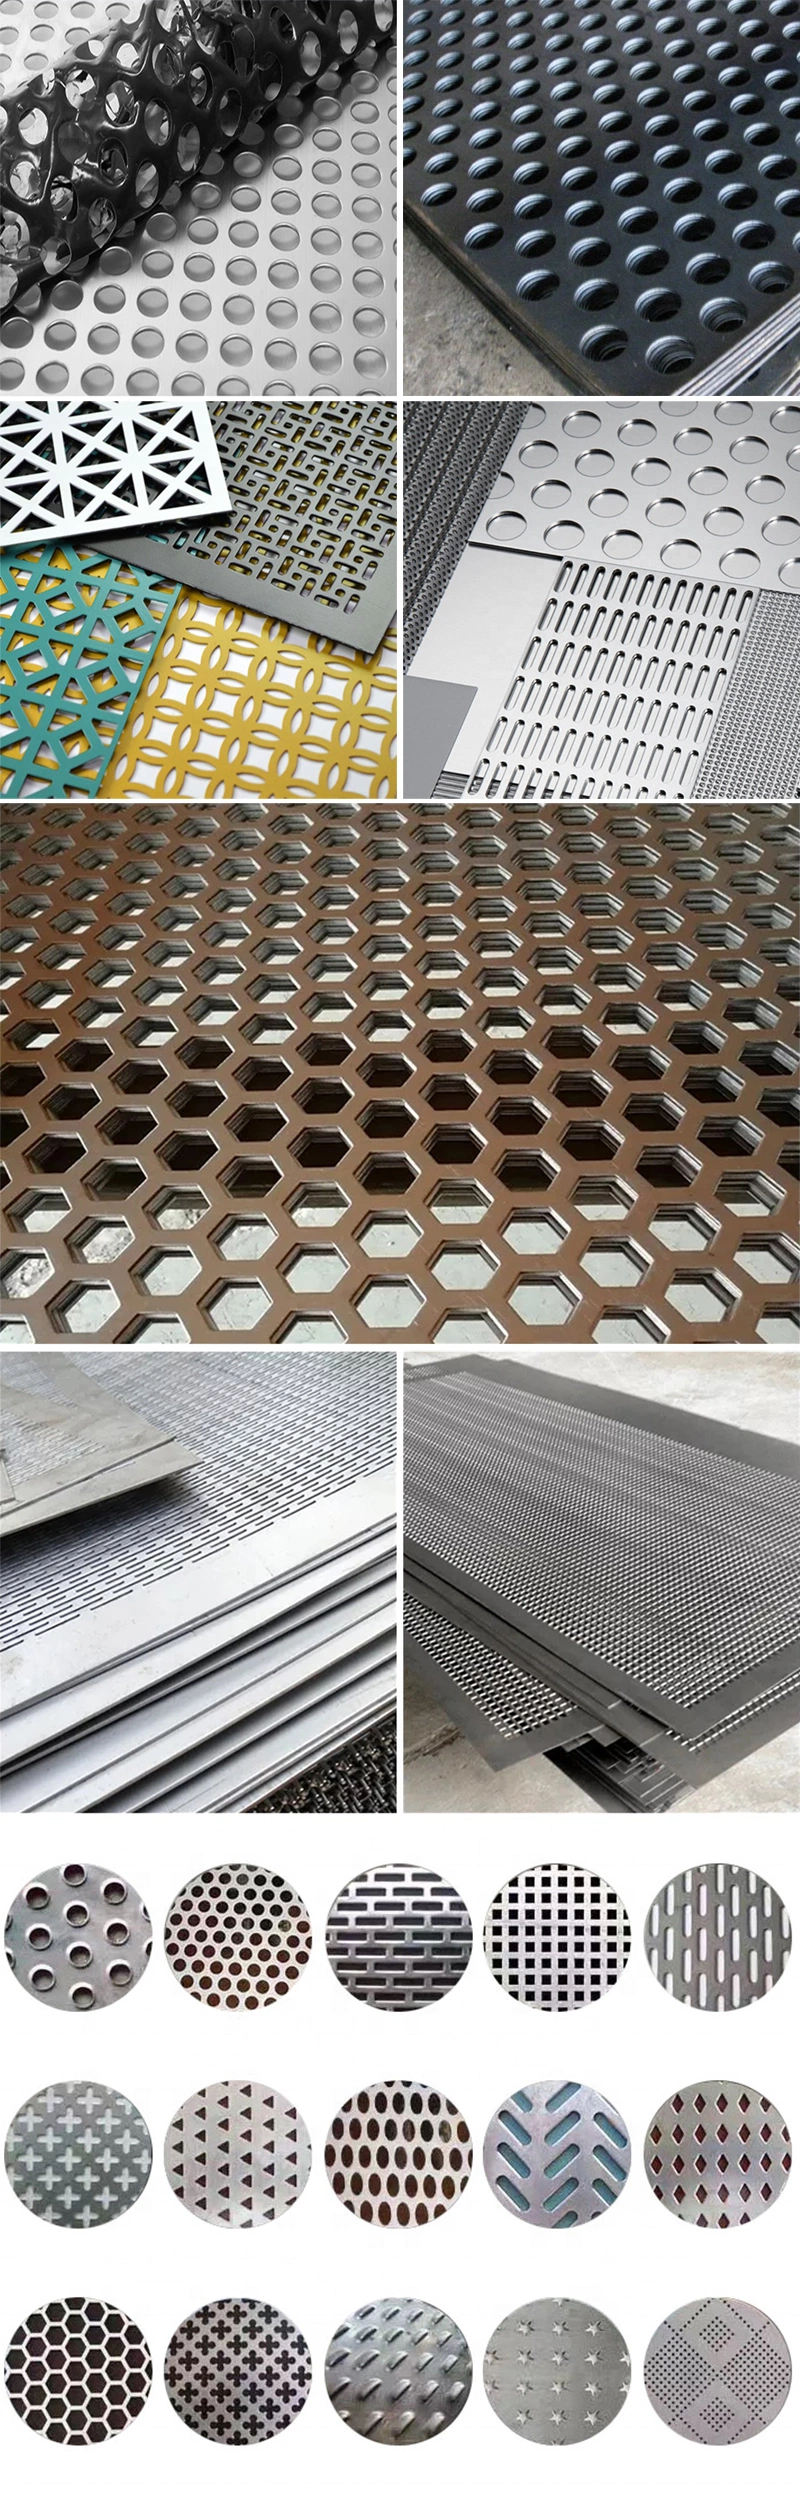 China Supplier Grille/Hexagon Perforated Metal Plate Duplex 2205 2507 Manufacturers of Round Hole Mild Steel